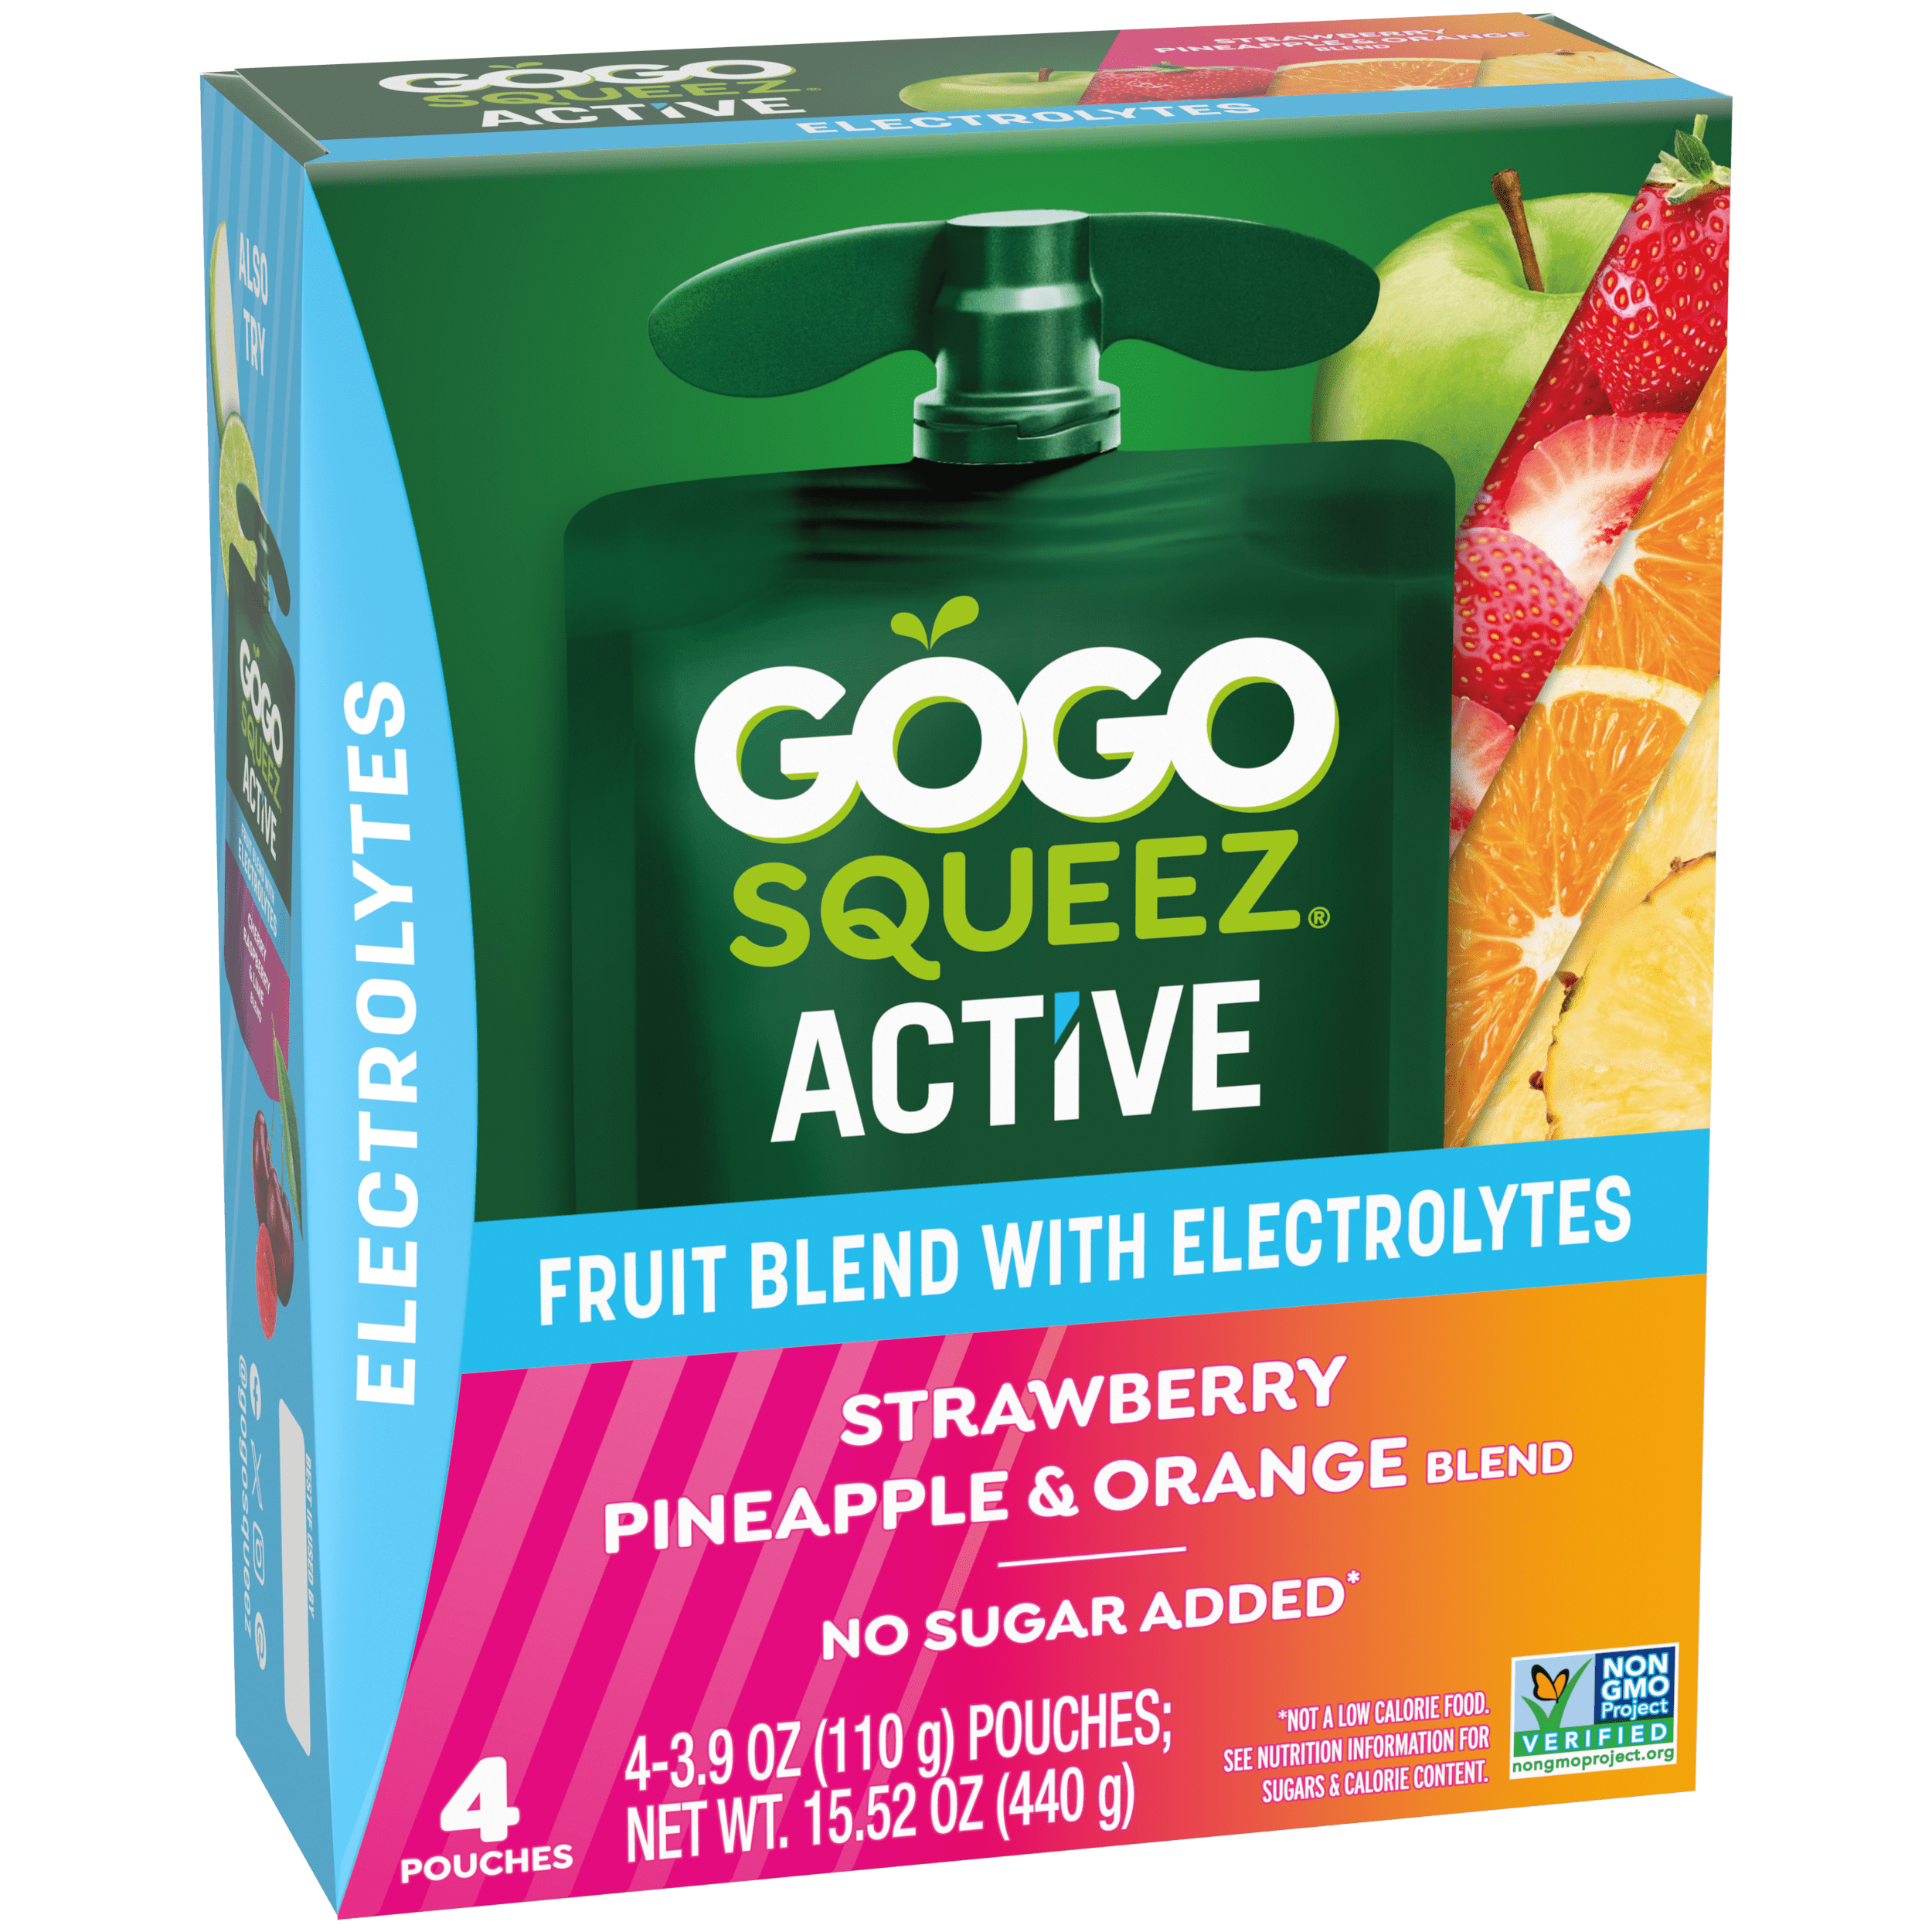 Gogo Squeez Active Fruit Blend With Electrolytes Strawberry, Pineapple & Orange 4 pack Product Box